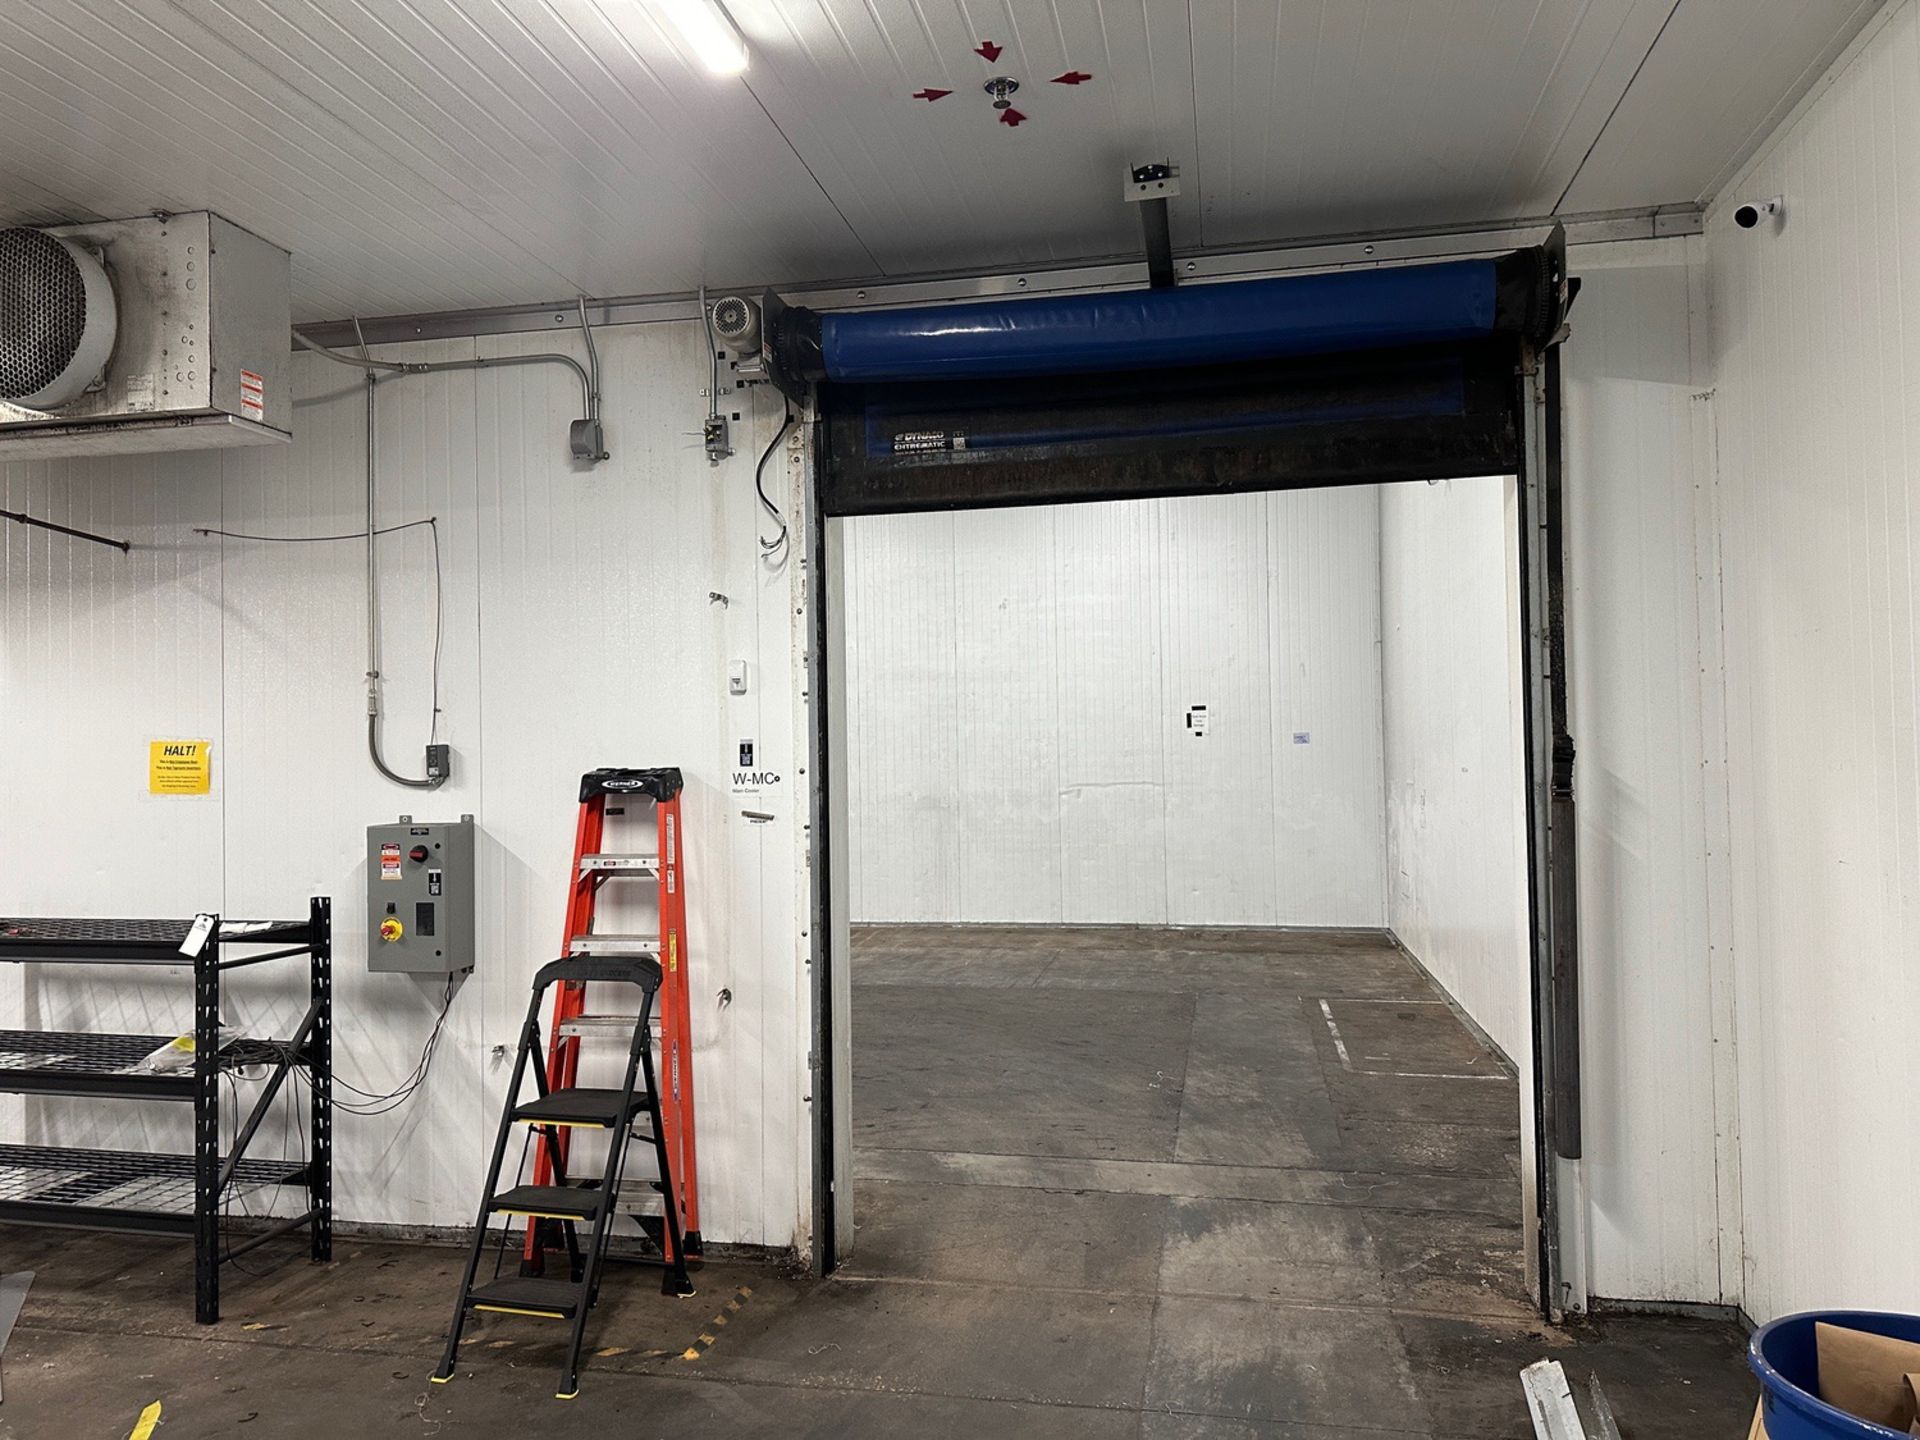 Cold Box - (3) Cooling Units - Shared Wall - (Approx. 32' x 77' x 18' - | Rig Fee $Contact Rigger - Image 10 of 14